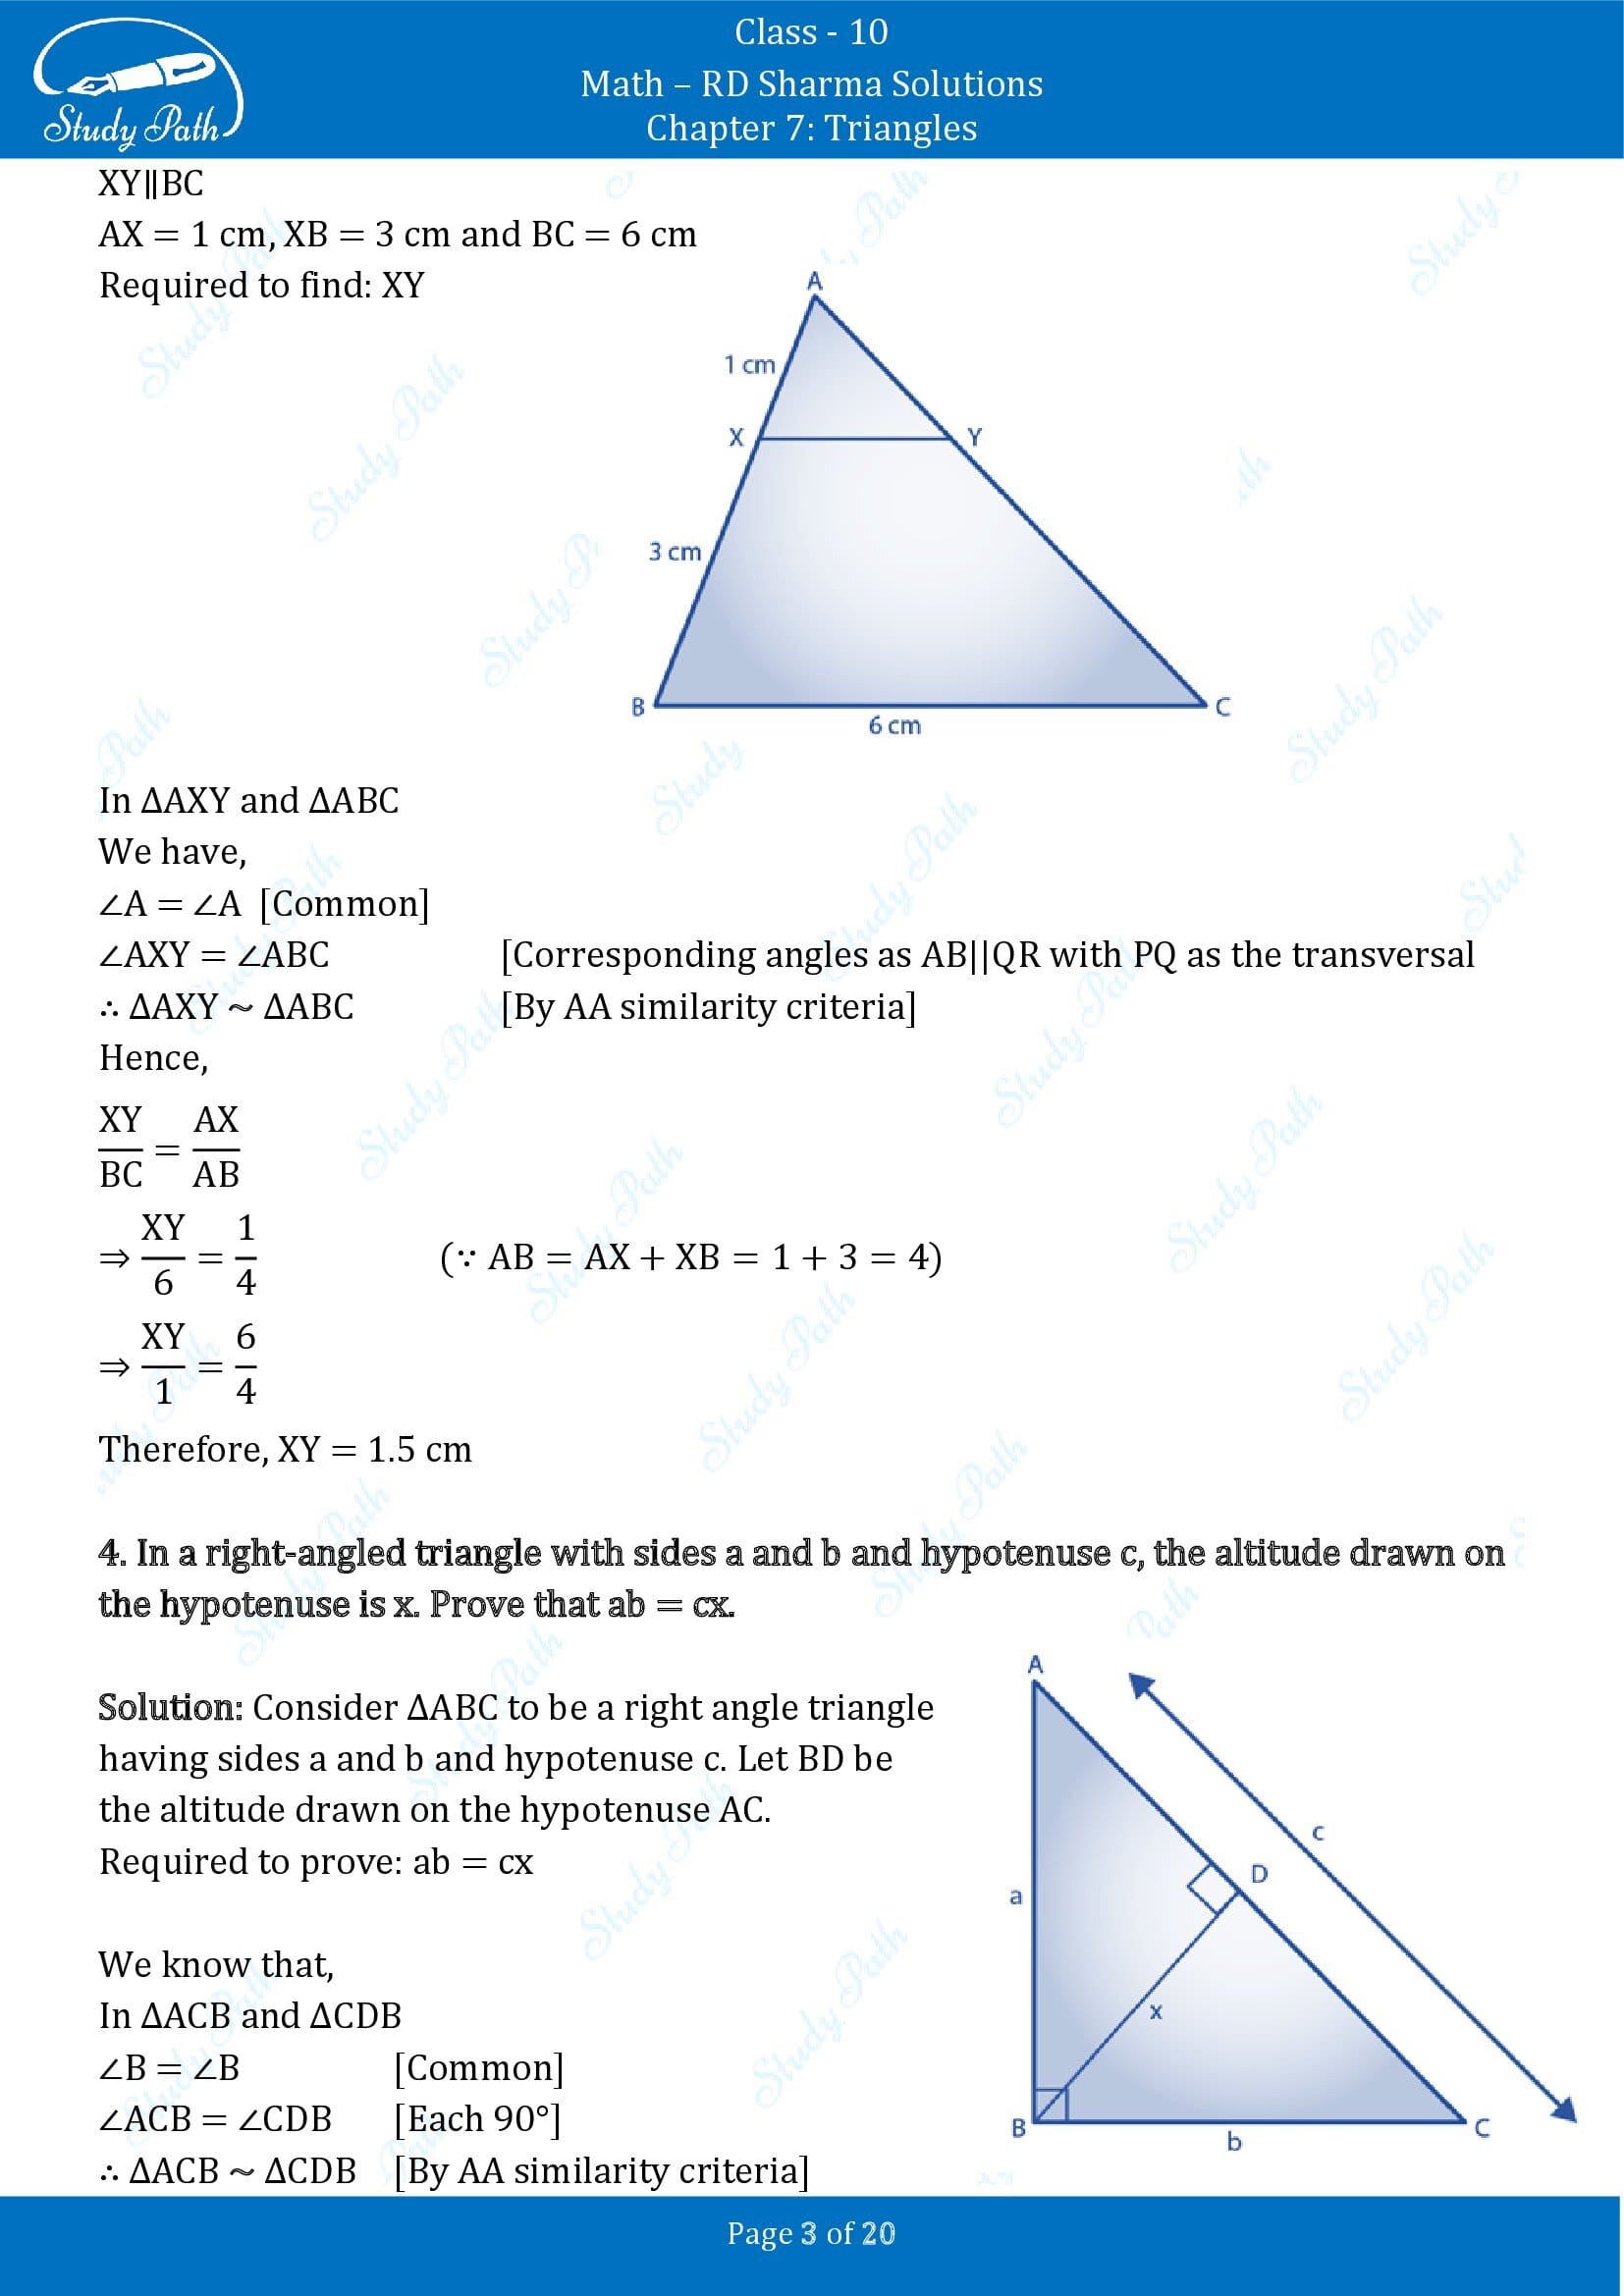 RD Sharma Solutions Class 10 Chapter 7 Triangles Exercise 7.5 00003